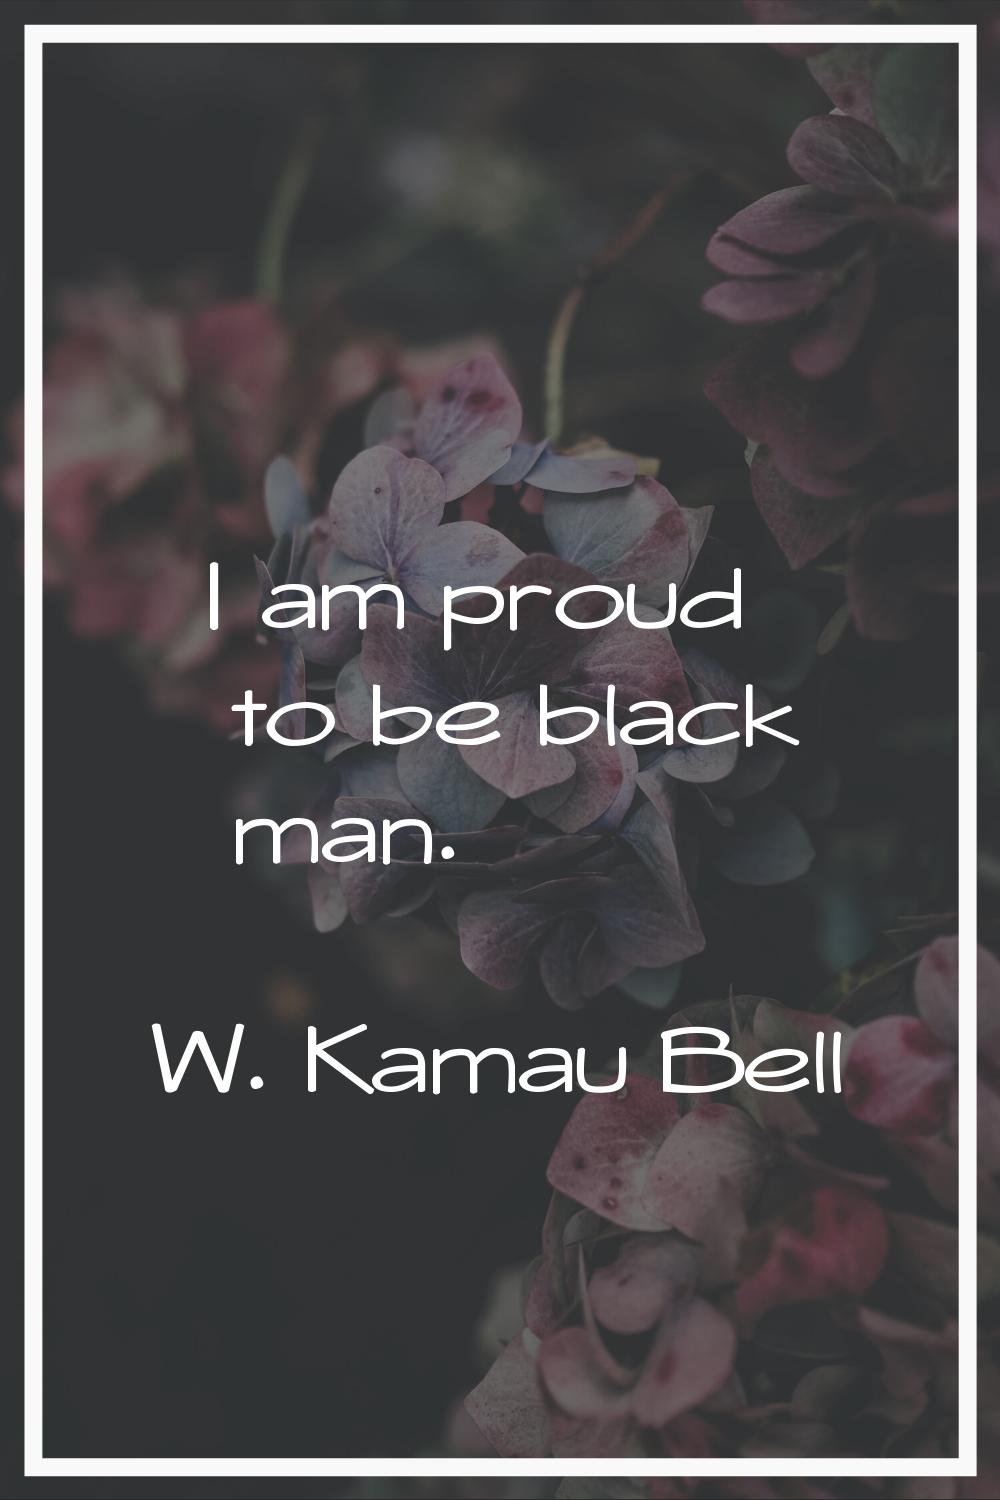 I am proud to be black man.